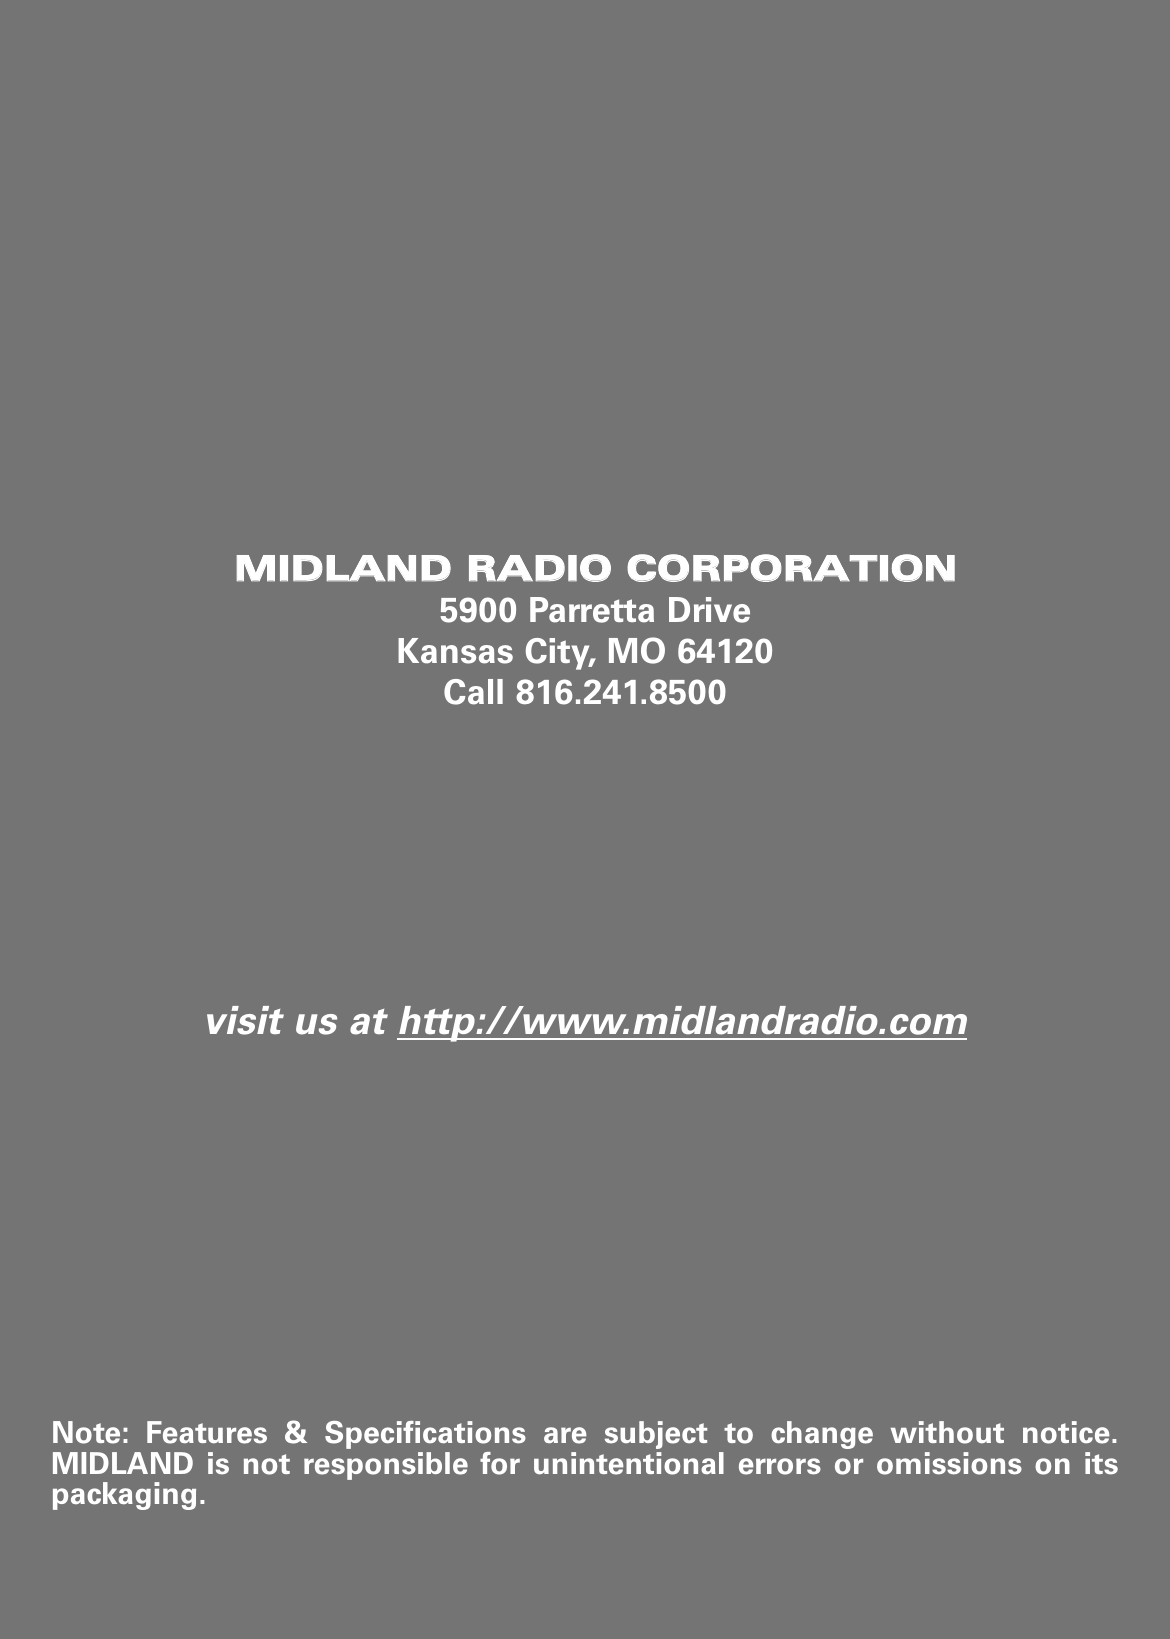 MMIIDDLLAANNDD  RRAADDIIOO  CCOORRPPOORRAATTIIOONN5900 Parretta DriveKansas City, MO 64120Call 816.241.8500visit us at http://www.midlandradio.comNote: Features &amp; Specifications are subject to change without notice.MIDLAND is not responsible for unintentional errors or omissions on itspackaging.